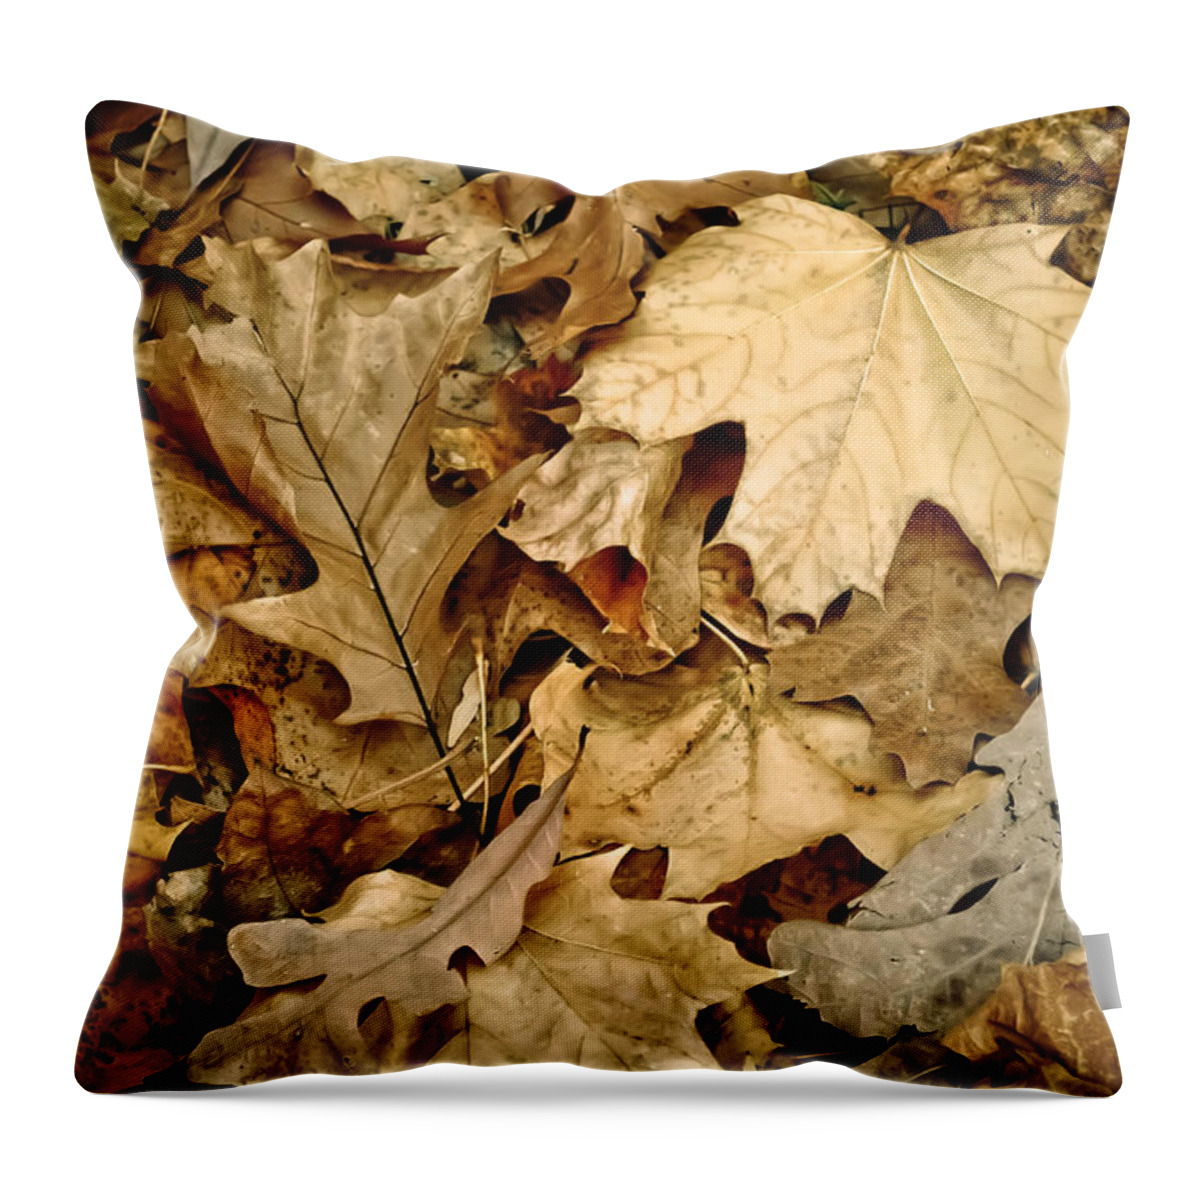 Leaf Throw Pillow featuring the photograph Rustle by Trish Tritz